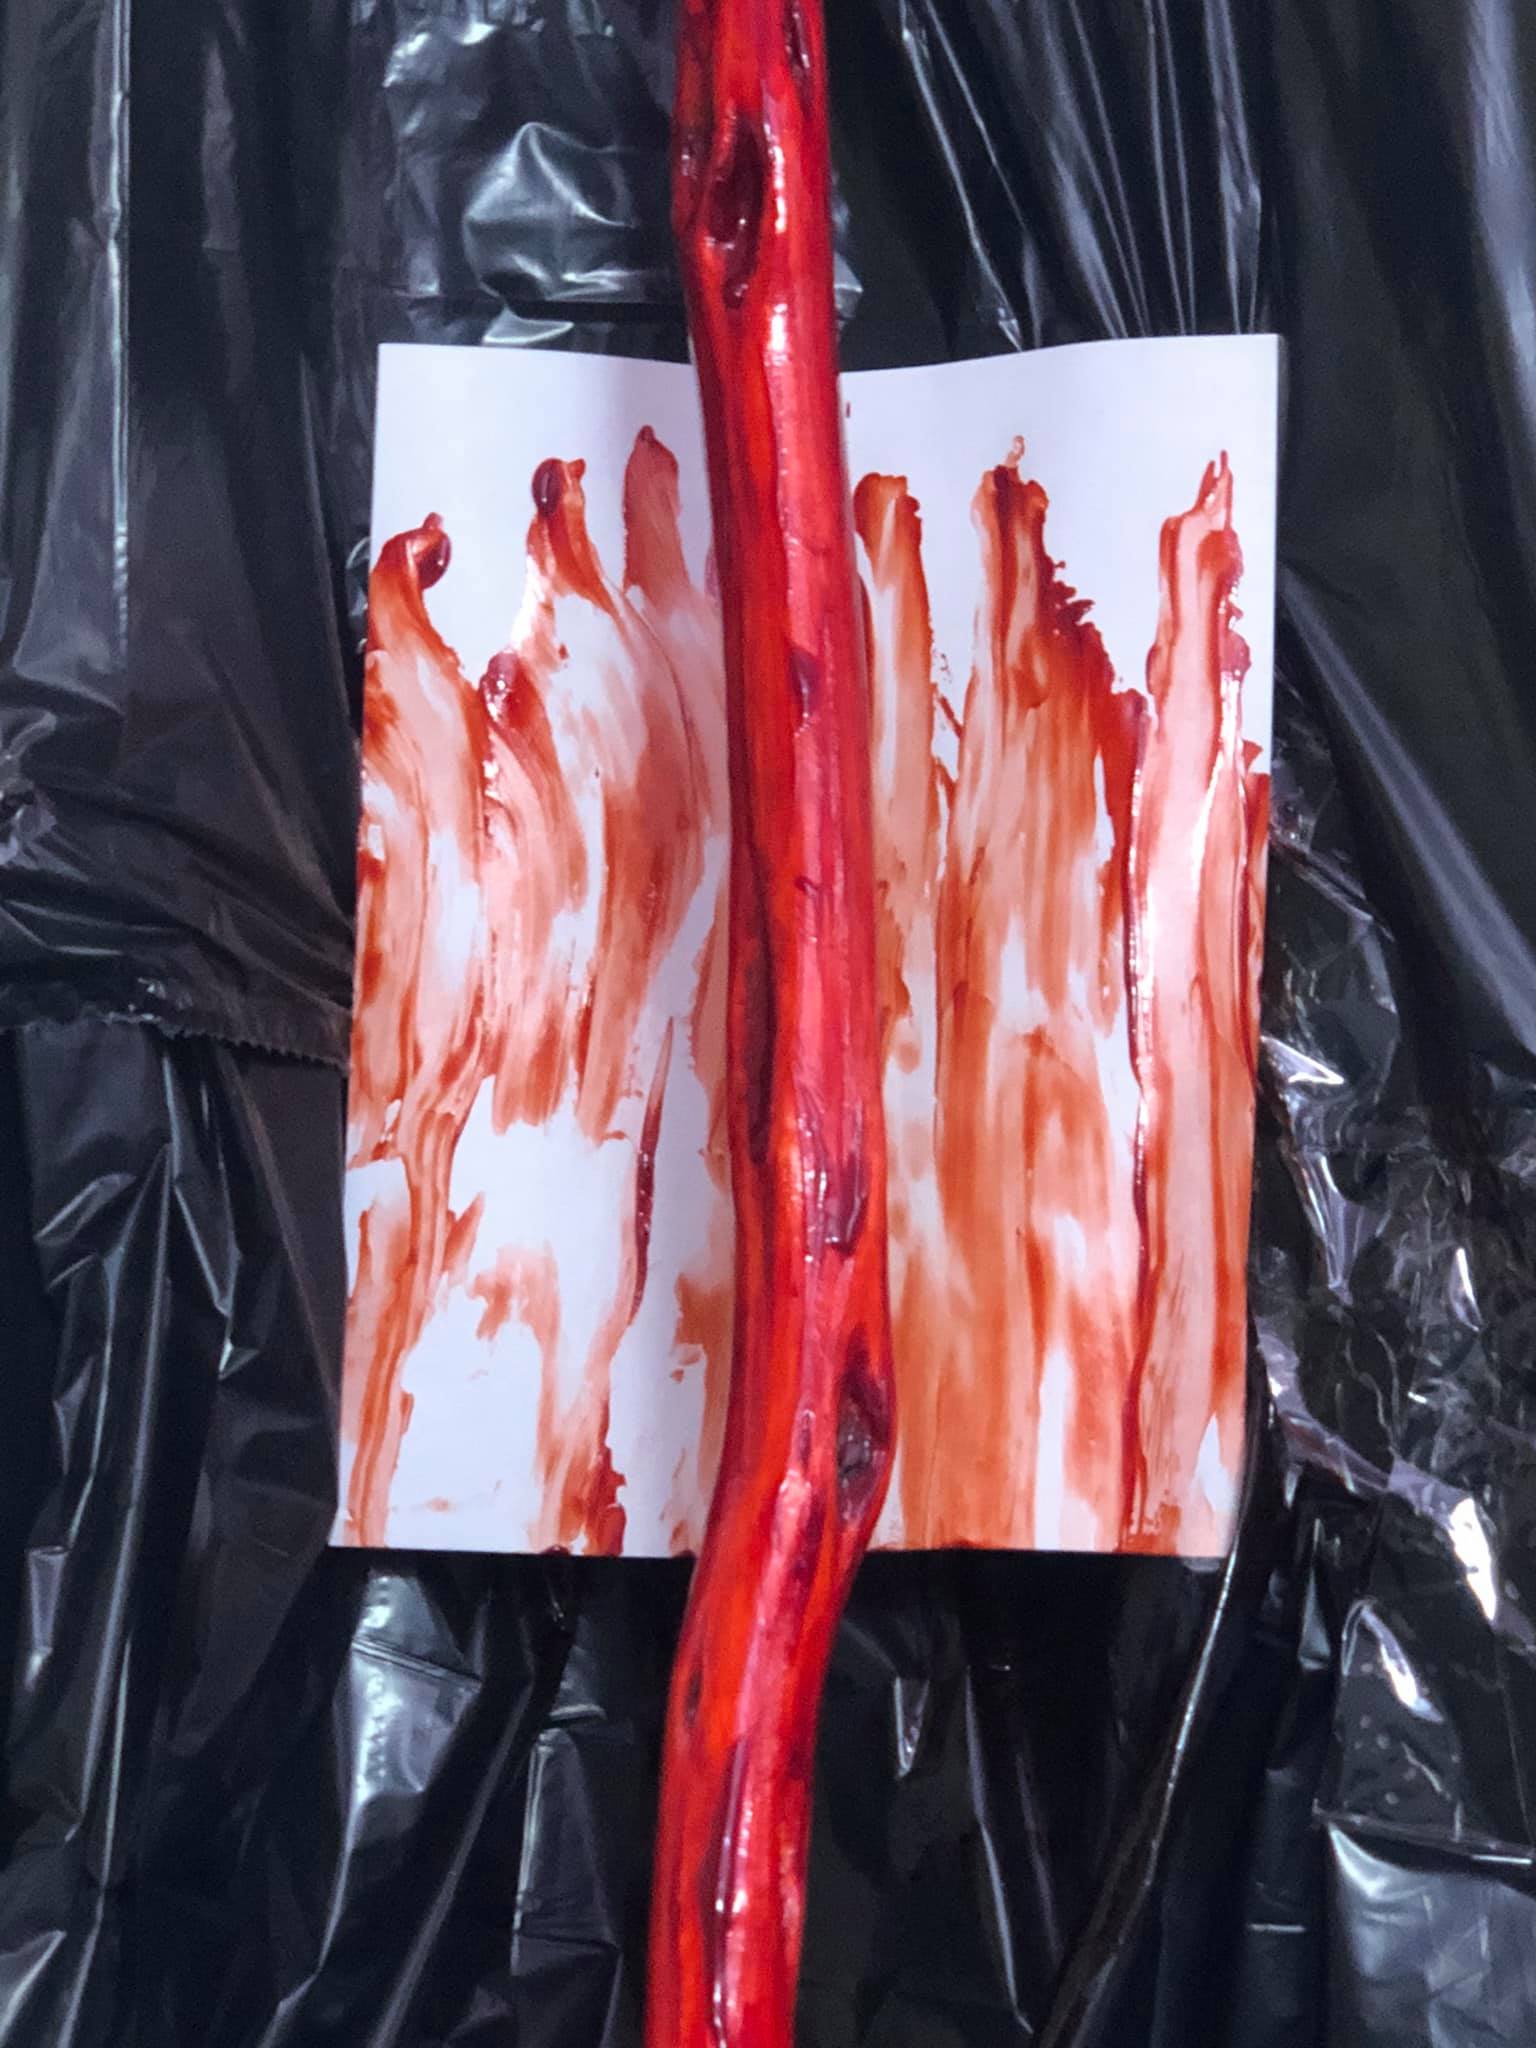 The middle canvas, showing multiple smear lines of blood down the canvas. The staff in front of the canvas loos a bit like a blood covered bone.